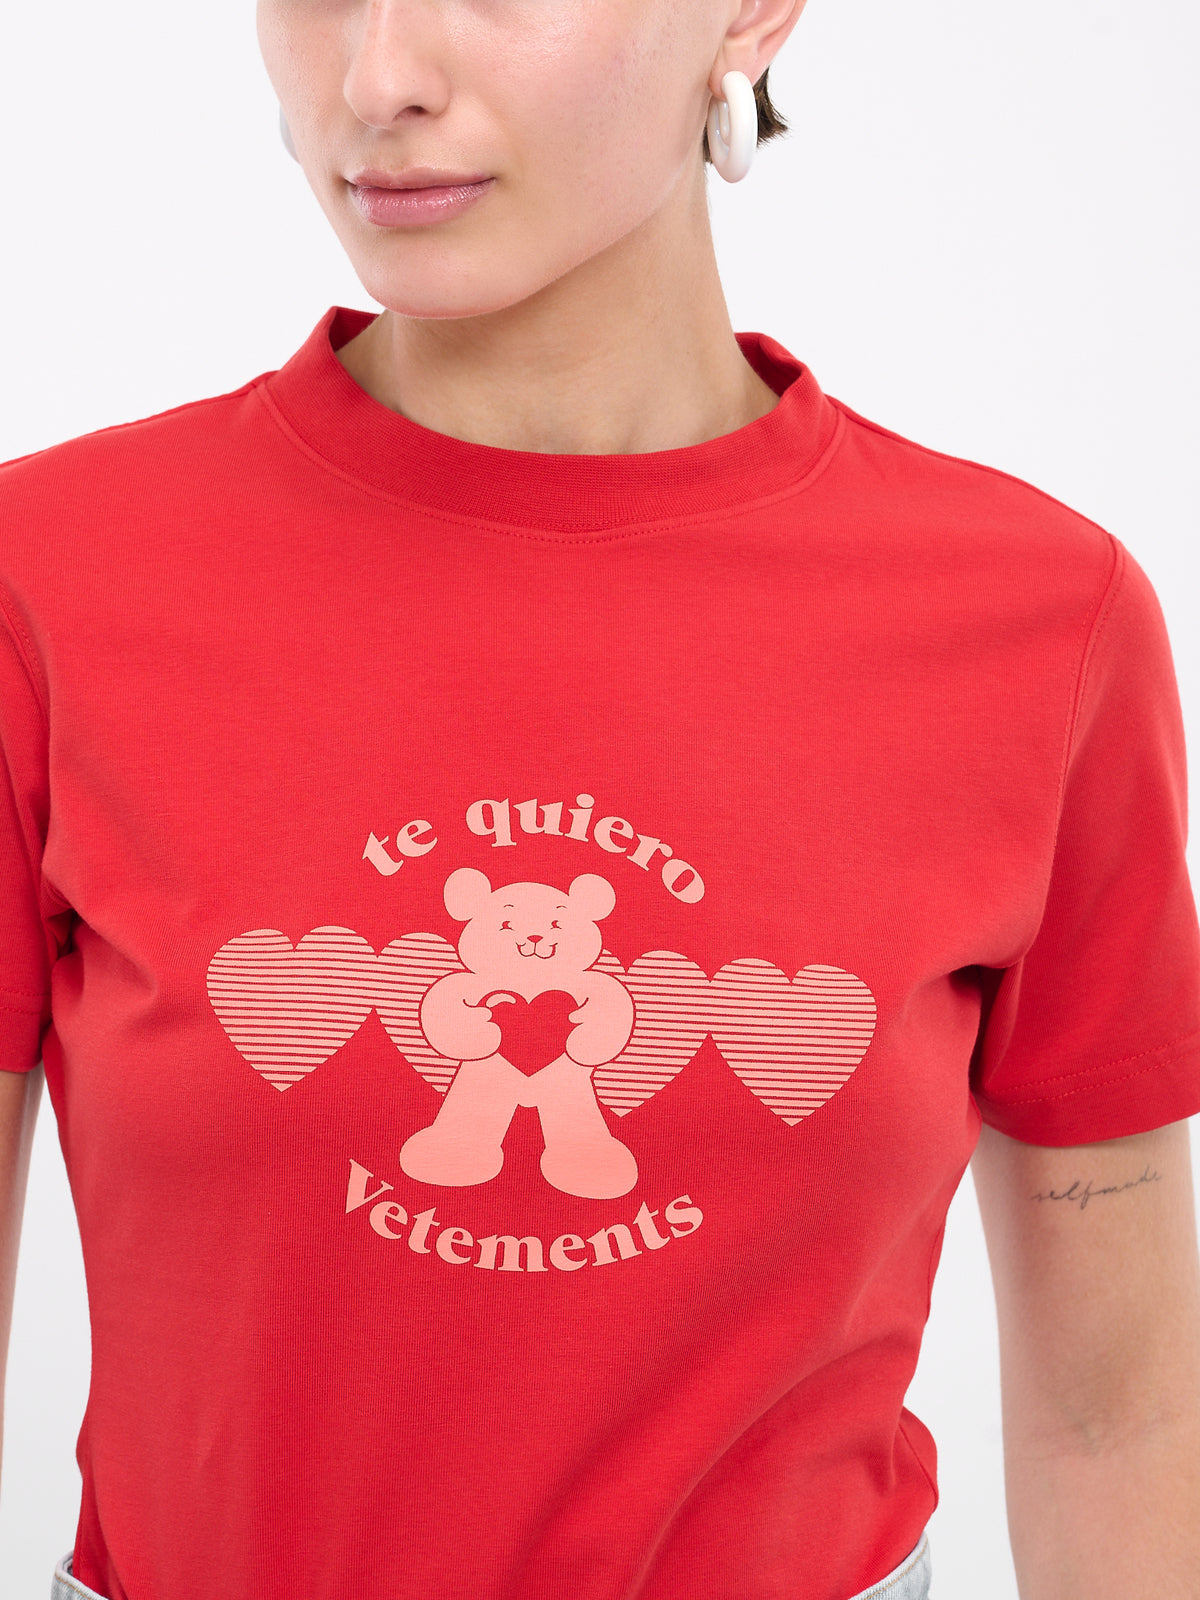 'Te Quiero' Logo Fitted Tee (UE64TR780R-RED)